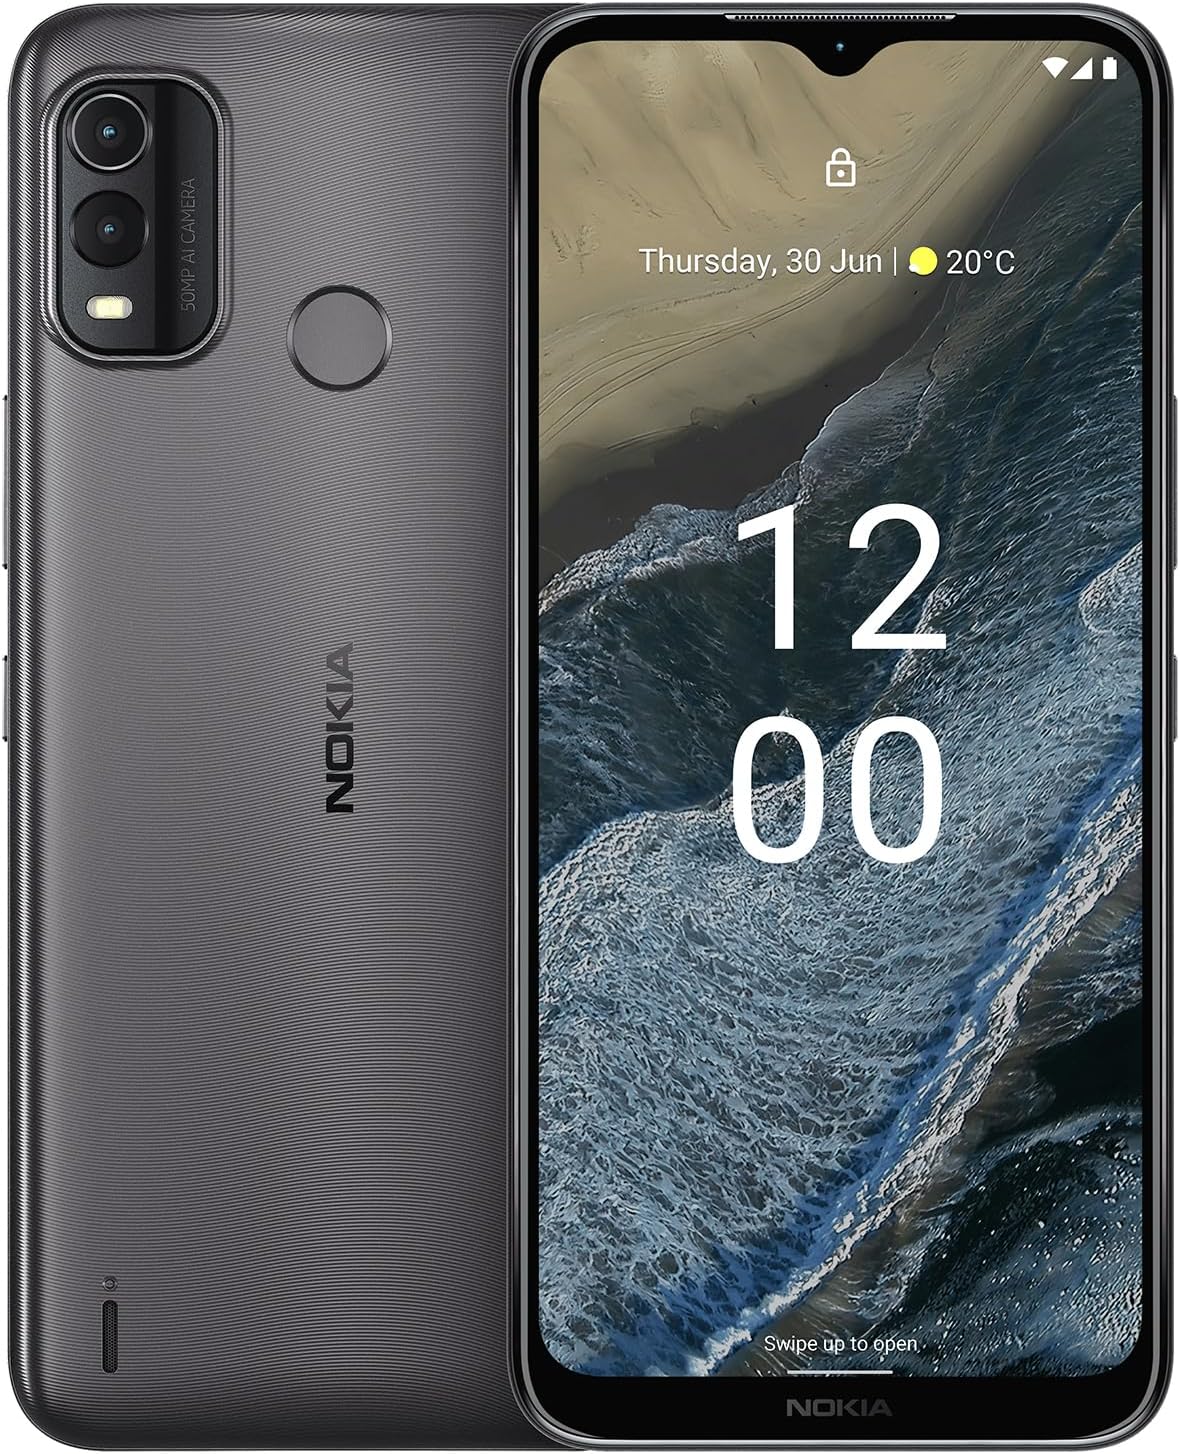 Nokia G11 Plus | Android 12 | Dual SIM | 3-Day Battery | 50MP Camera | 3/64GB | 6.52-Inch Screen | Dual Band Wifi | Unlocked GSM Smartphone | Not Compatible with Verizon or AT&T | Charcoal